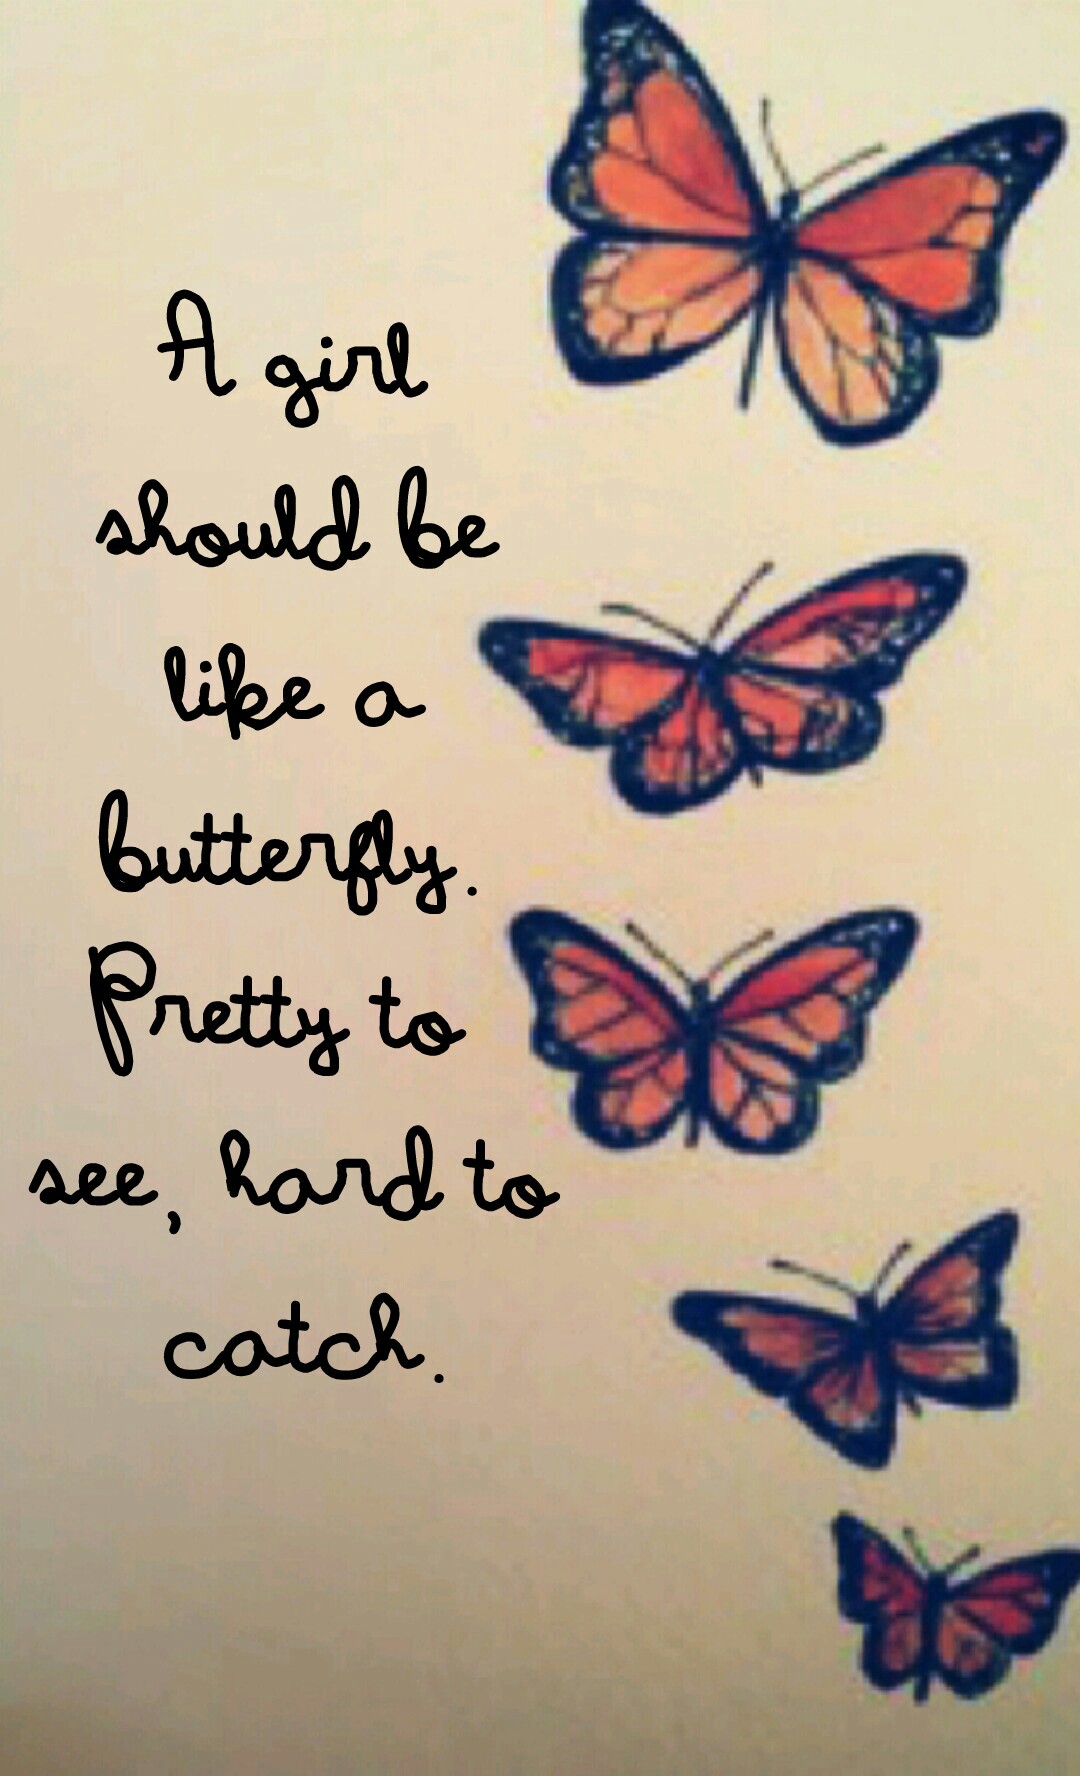 A girl should be like a butterfly. 
Pretty to see, hard to catch.